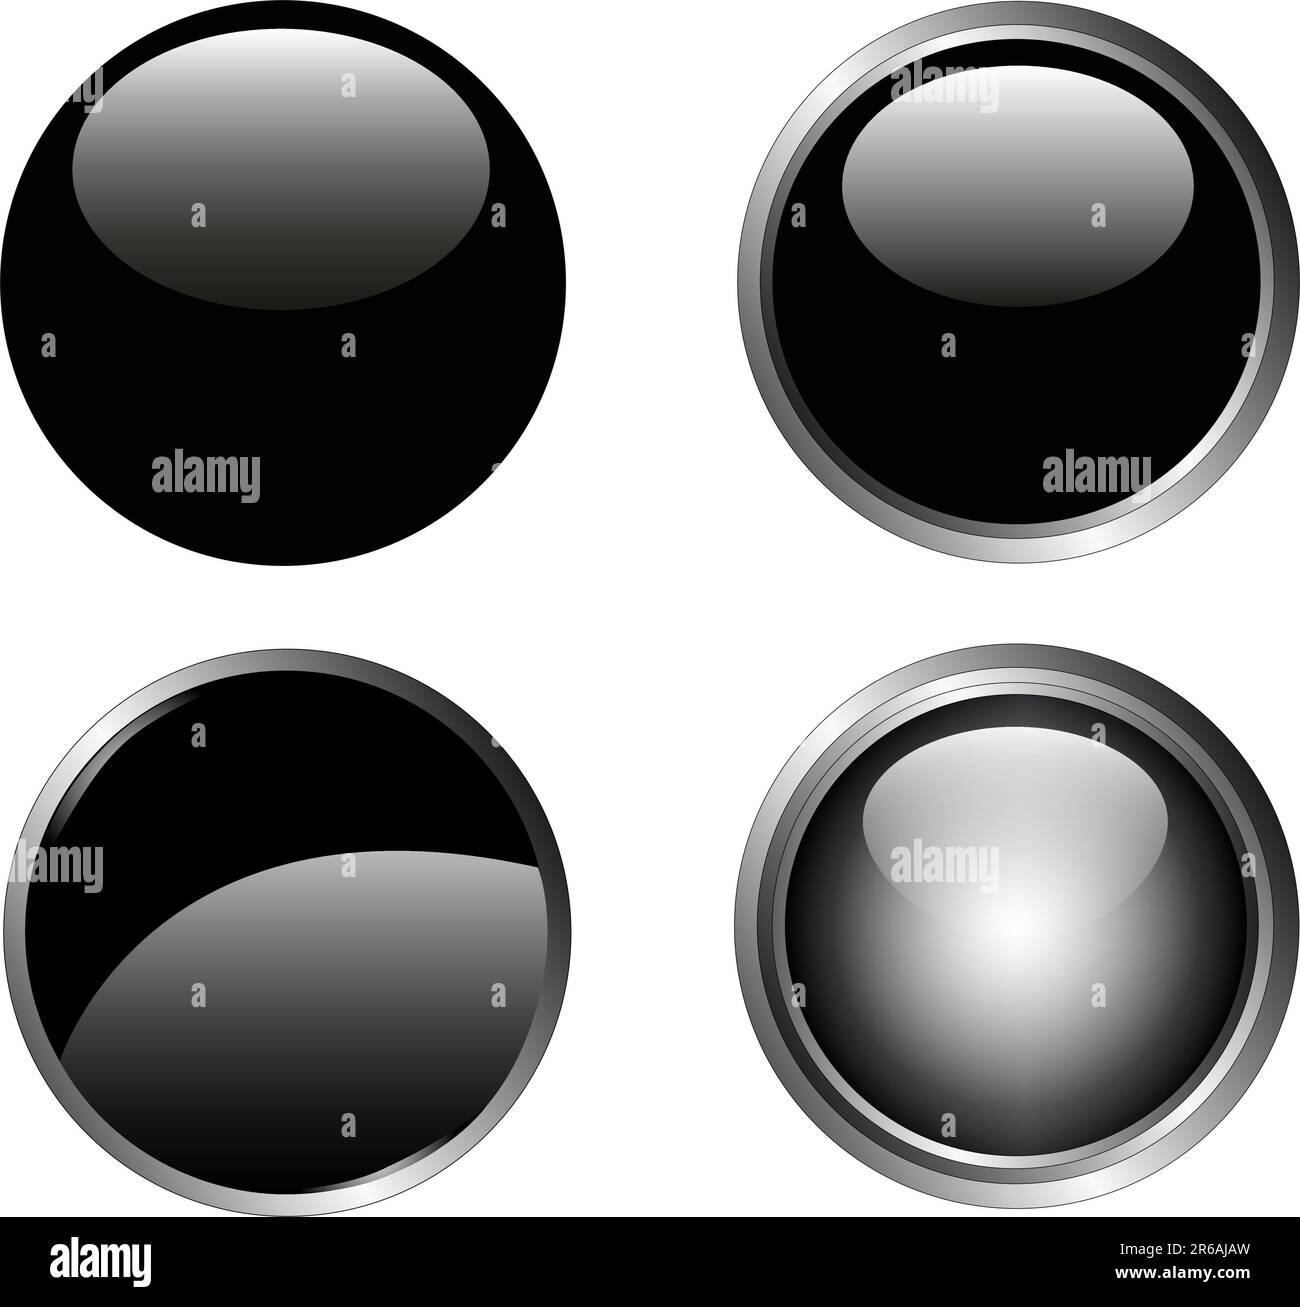 4 Classy Black Web Buttons with silver metallic edging Stock Vector